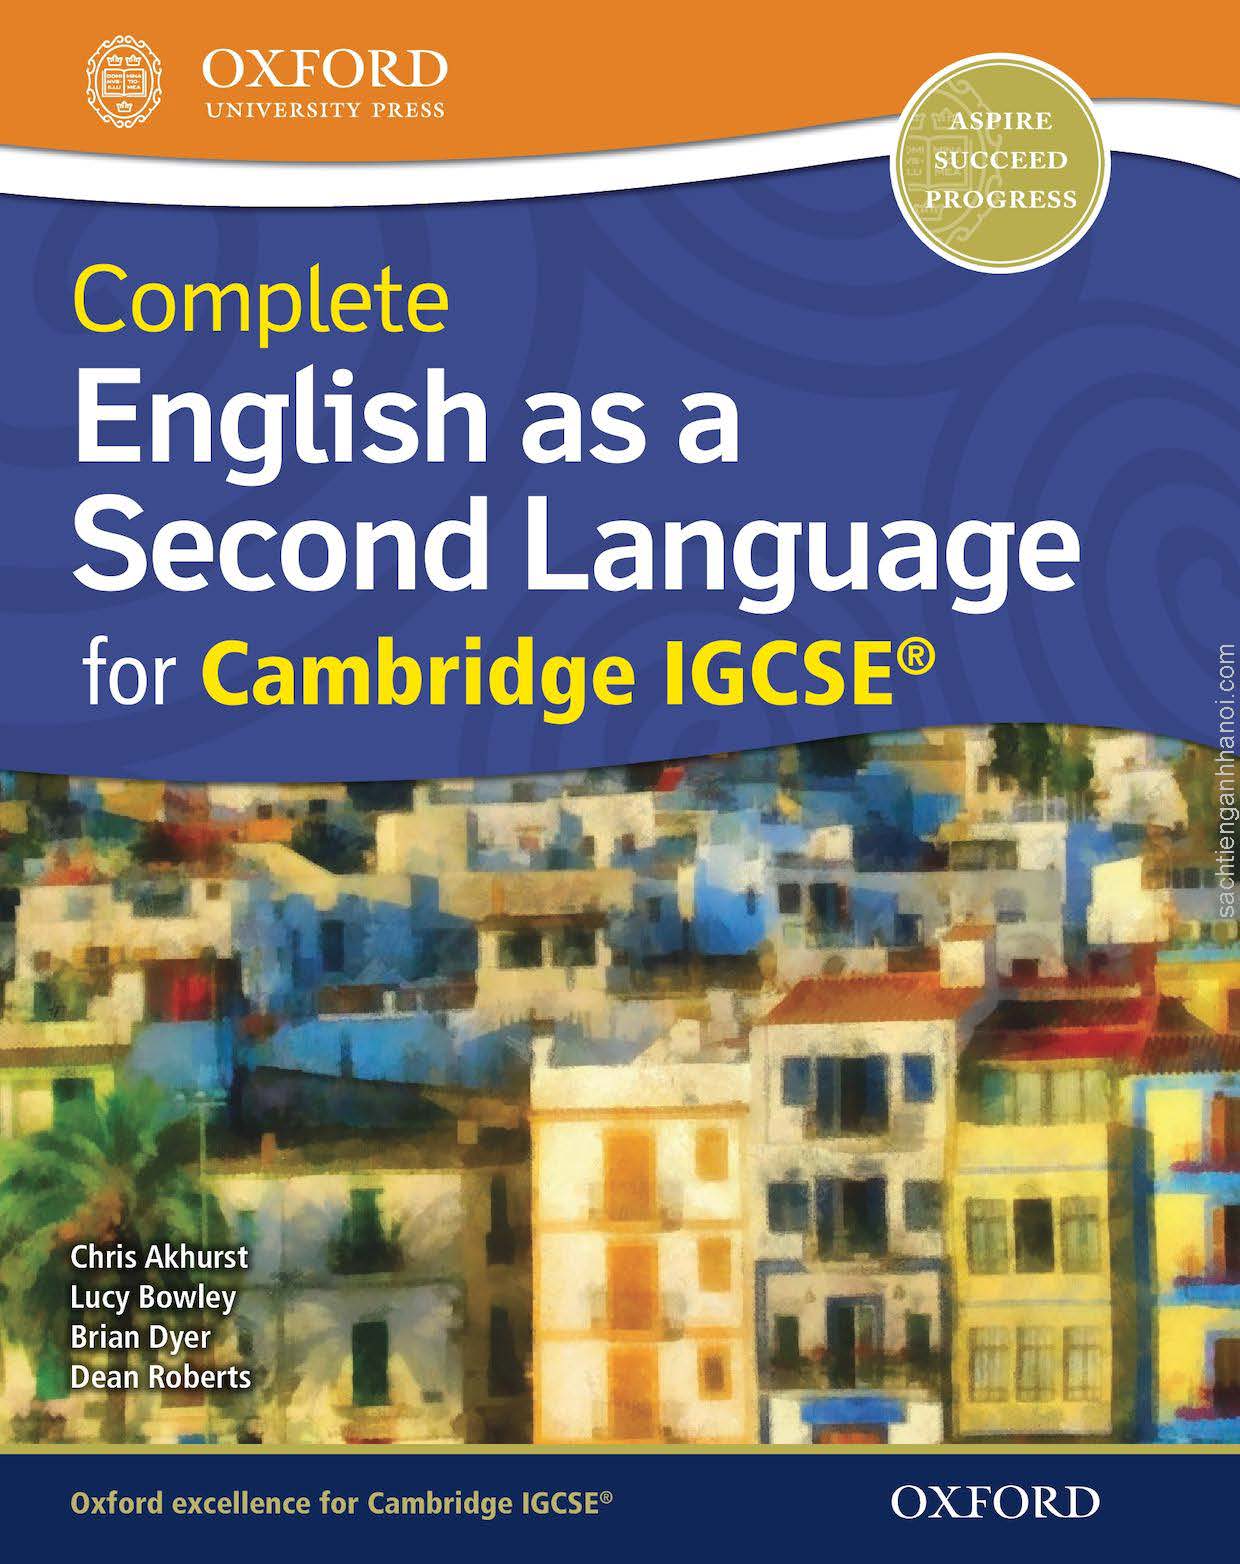 thesis about english as a second language